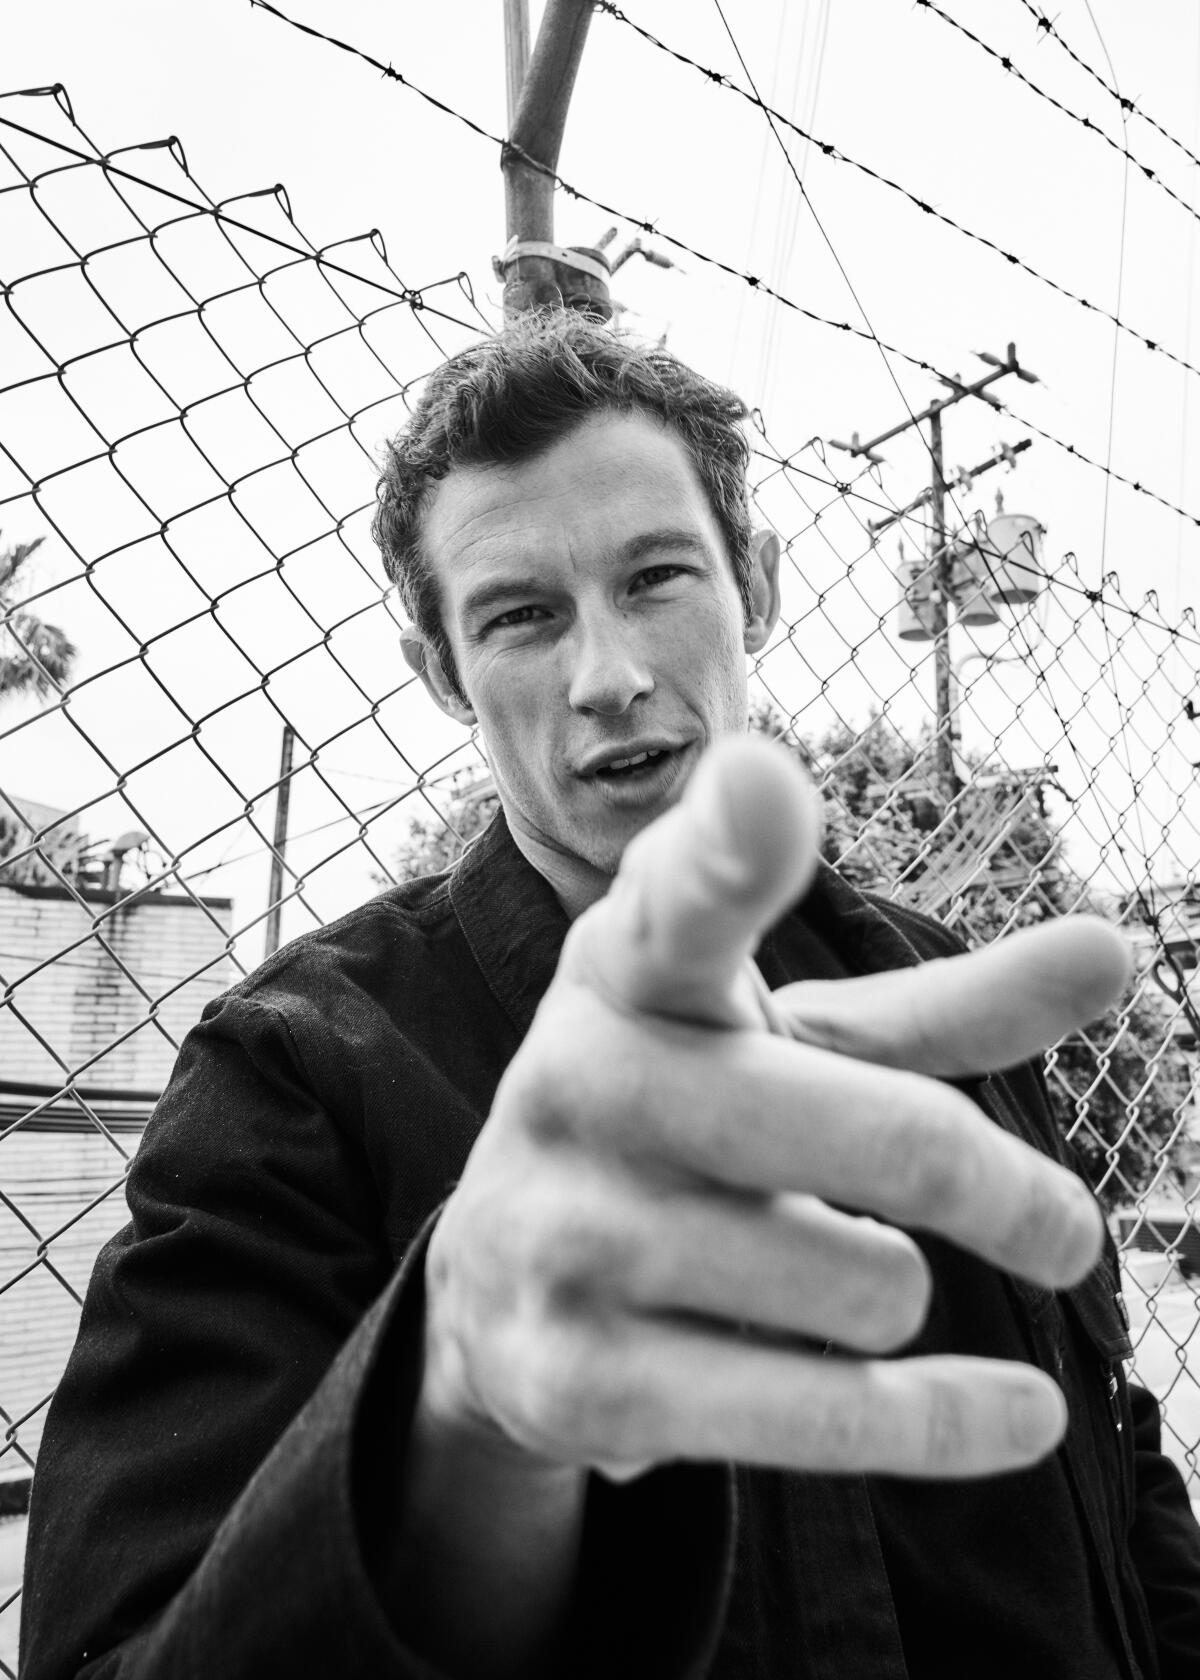 Callum Turner points his finger directly at the camera lens to take a portrait.